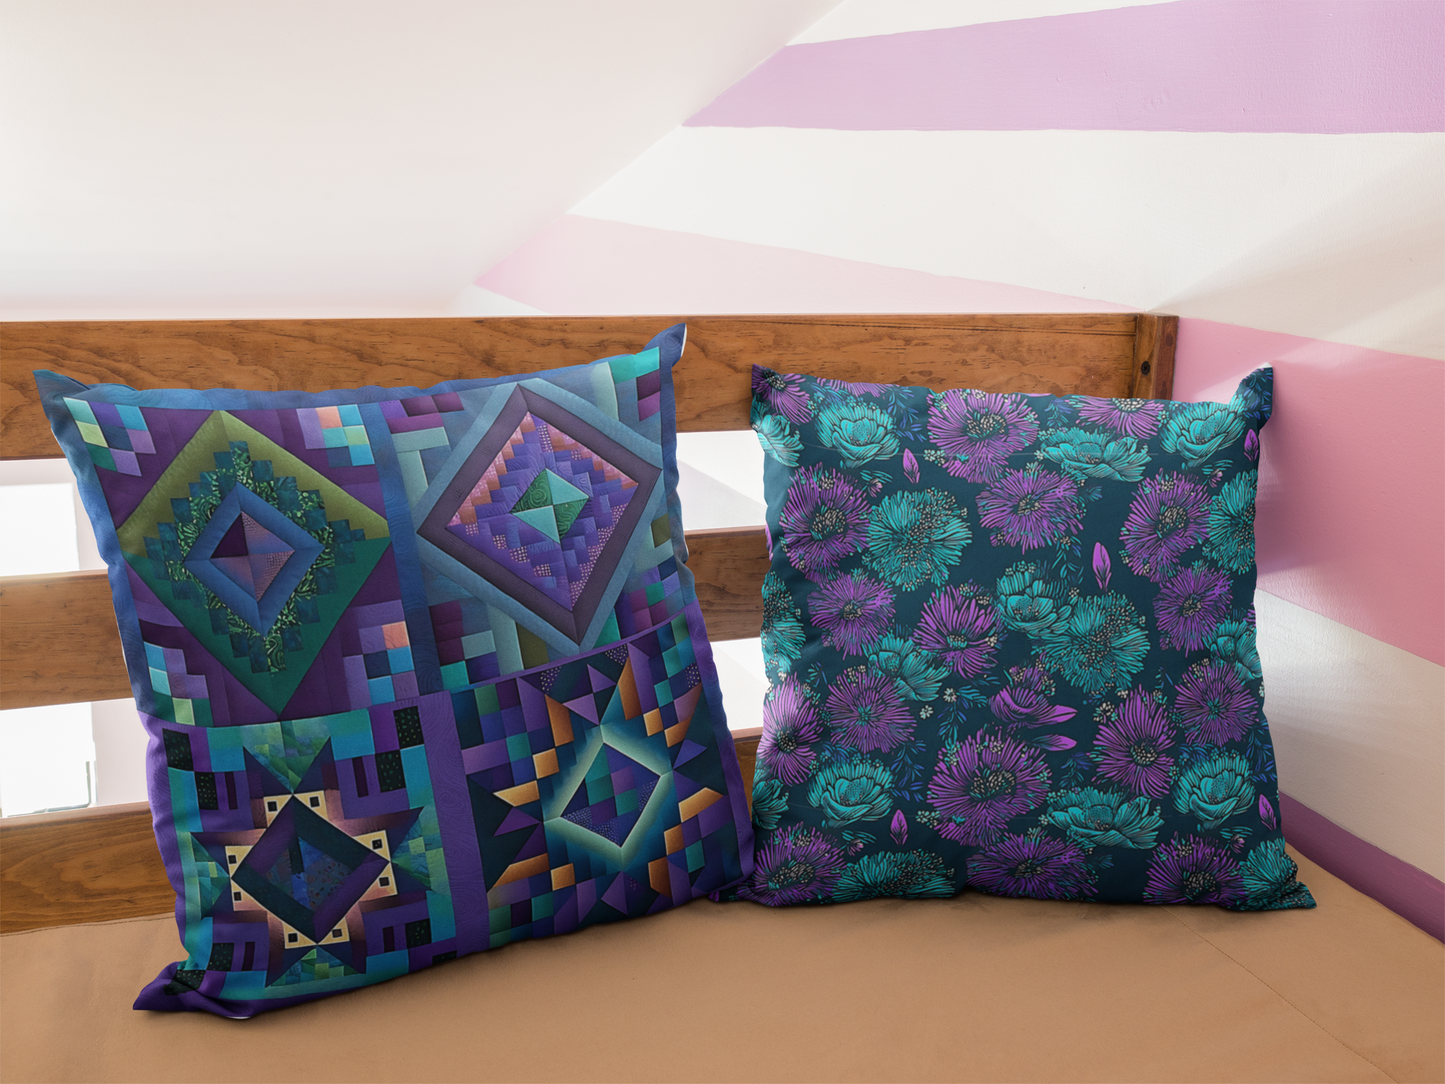 Purple and Teal Floral Pillows